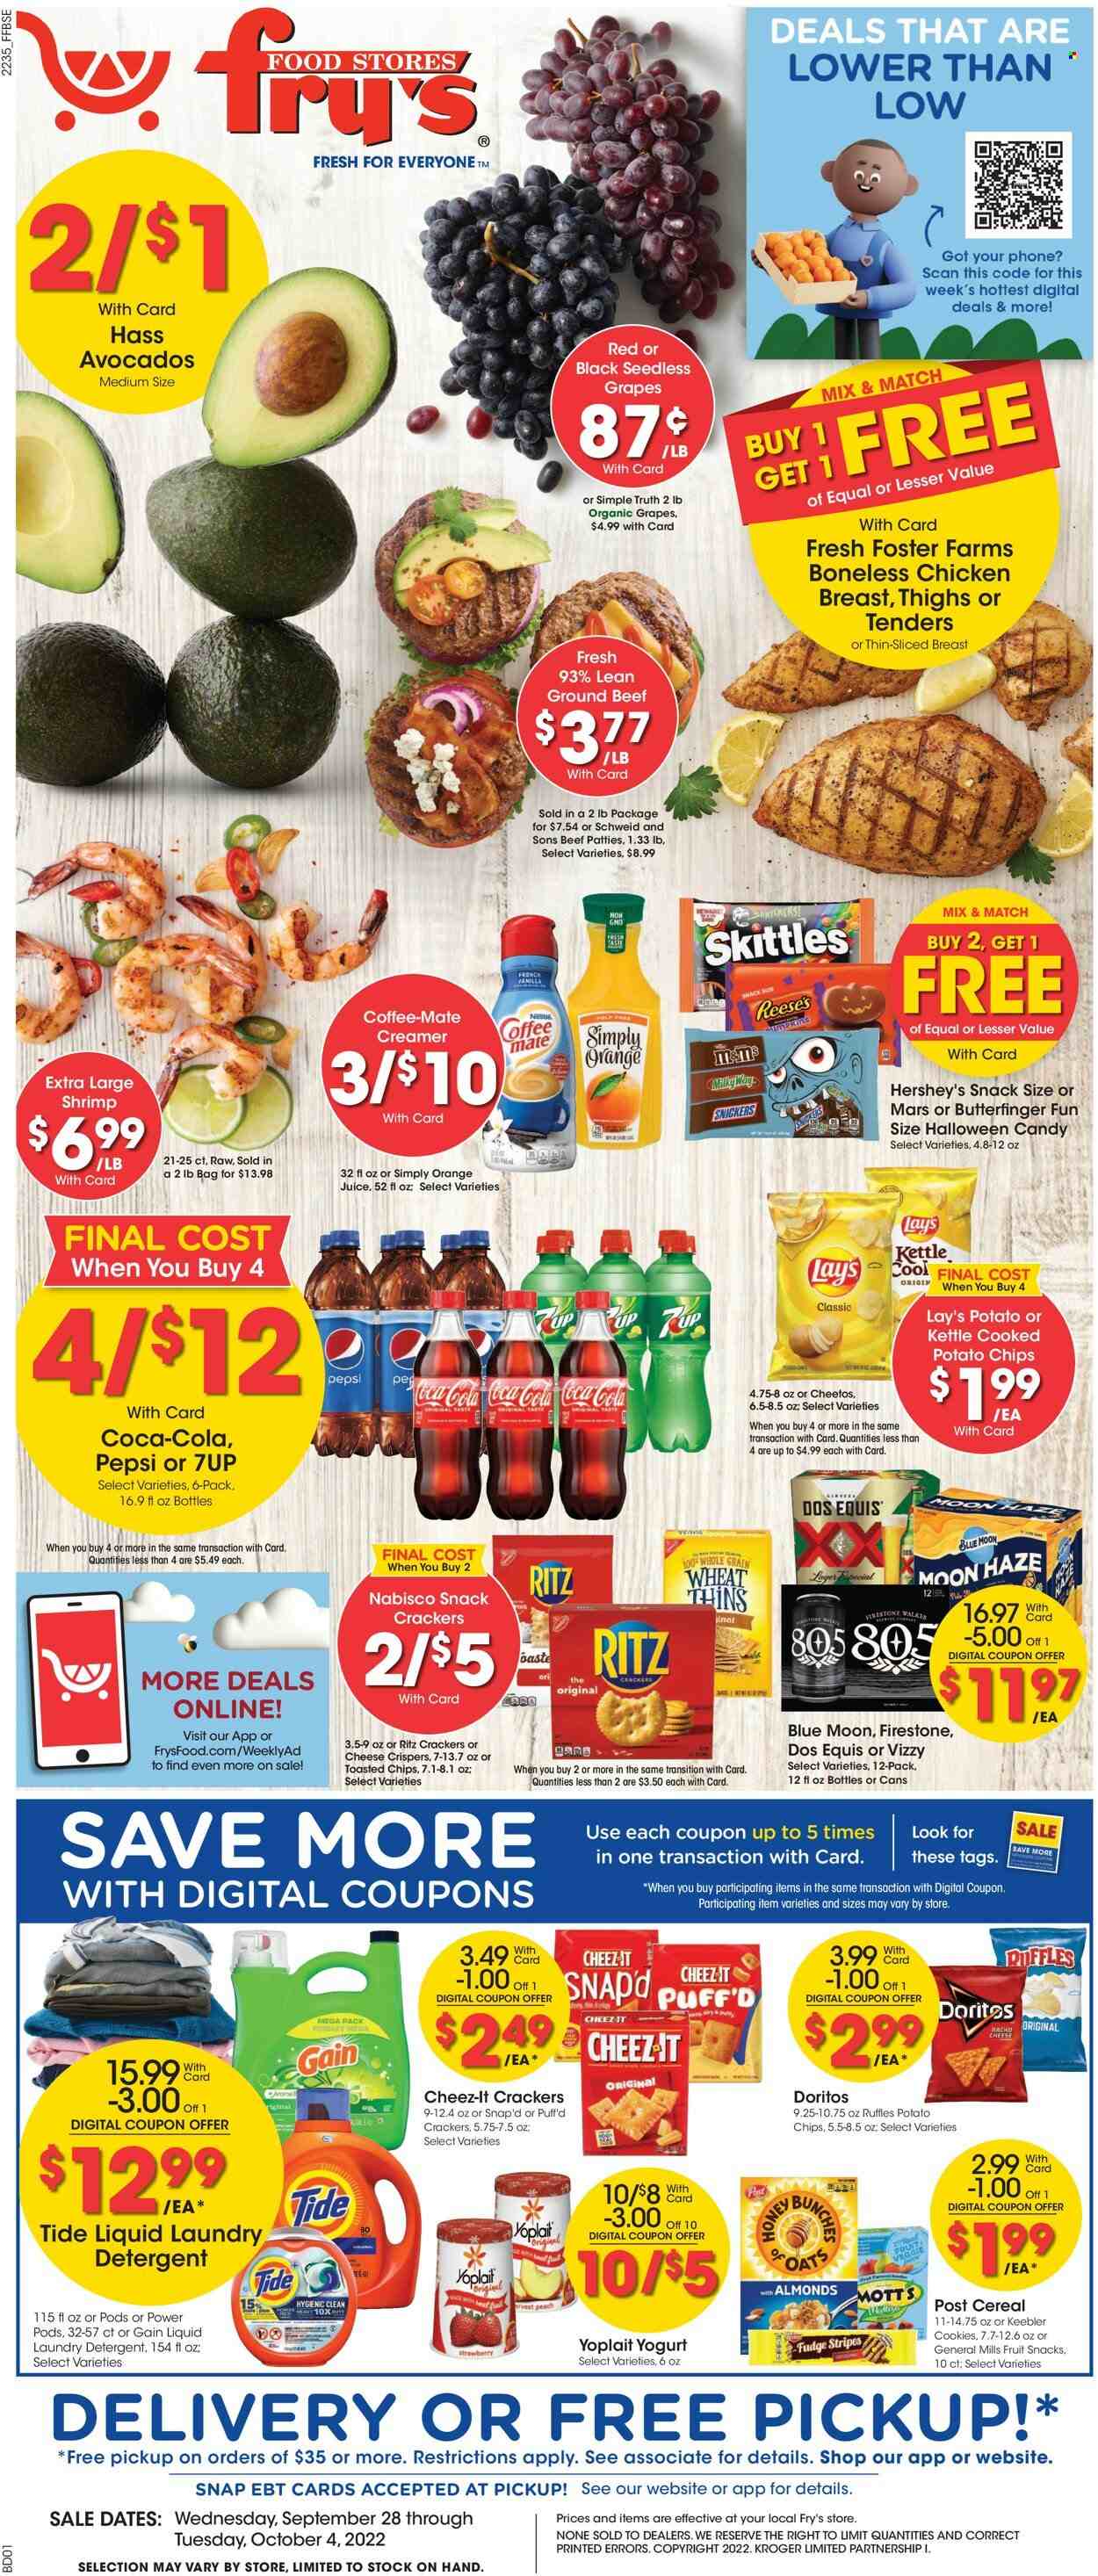 thumbnail - Fry’s Flyer - 09/28/2022 - 10/04/2022 - Sales products - avocado, grapes, seedless grapes, Mott's, shrimps, yoghurt, Yoplait, Coffee-Mate, creamer, Reese's, Hershey's, cookies, fudge, Milky Way, Snickers, Mars, crackers, Skittles, fruit snack, Keebler, RITZ, Doritos, potato chips, Cheetos, chips, Lay’s, Thins, Cheez-It, Ruffles, cereals, Coca-Cola, Pepsi, orange juice, juice, 7UP, beer, Lager, chicken breasts, beef meat, ground beef, detergent, Gain, Tide, laundry detergent, Dos Equis, Blue Moon. Page 1.